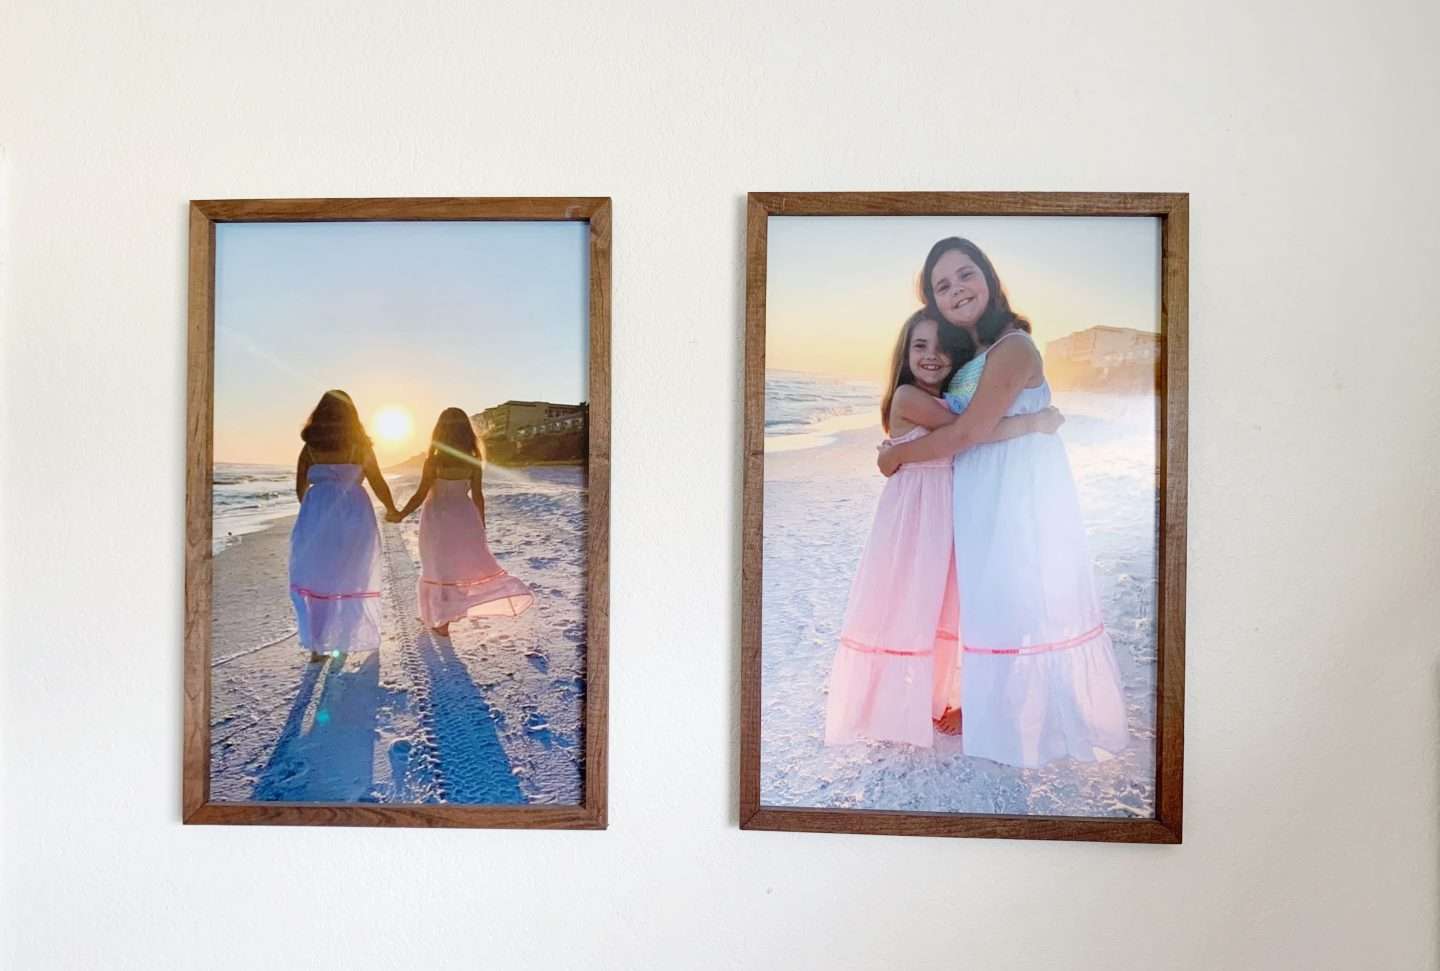 How to make your own large framed photo prints.